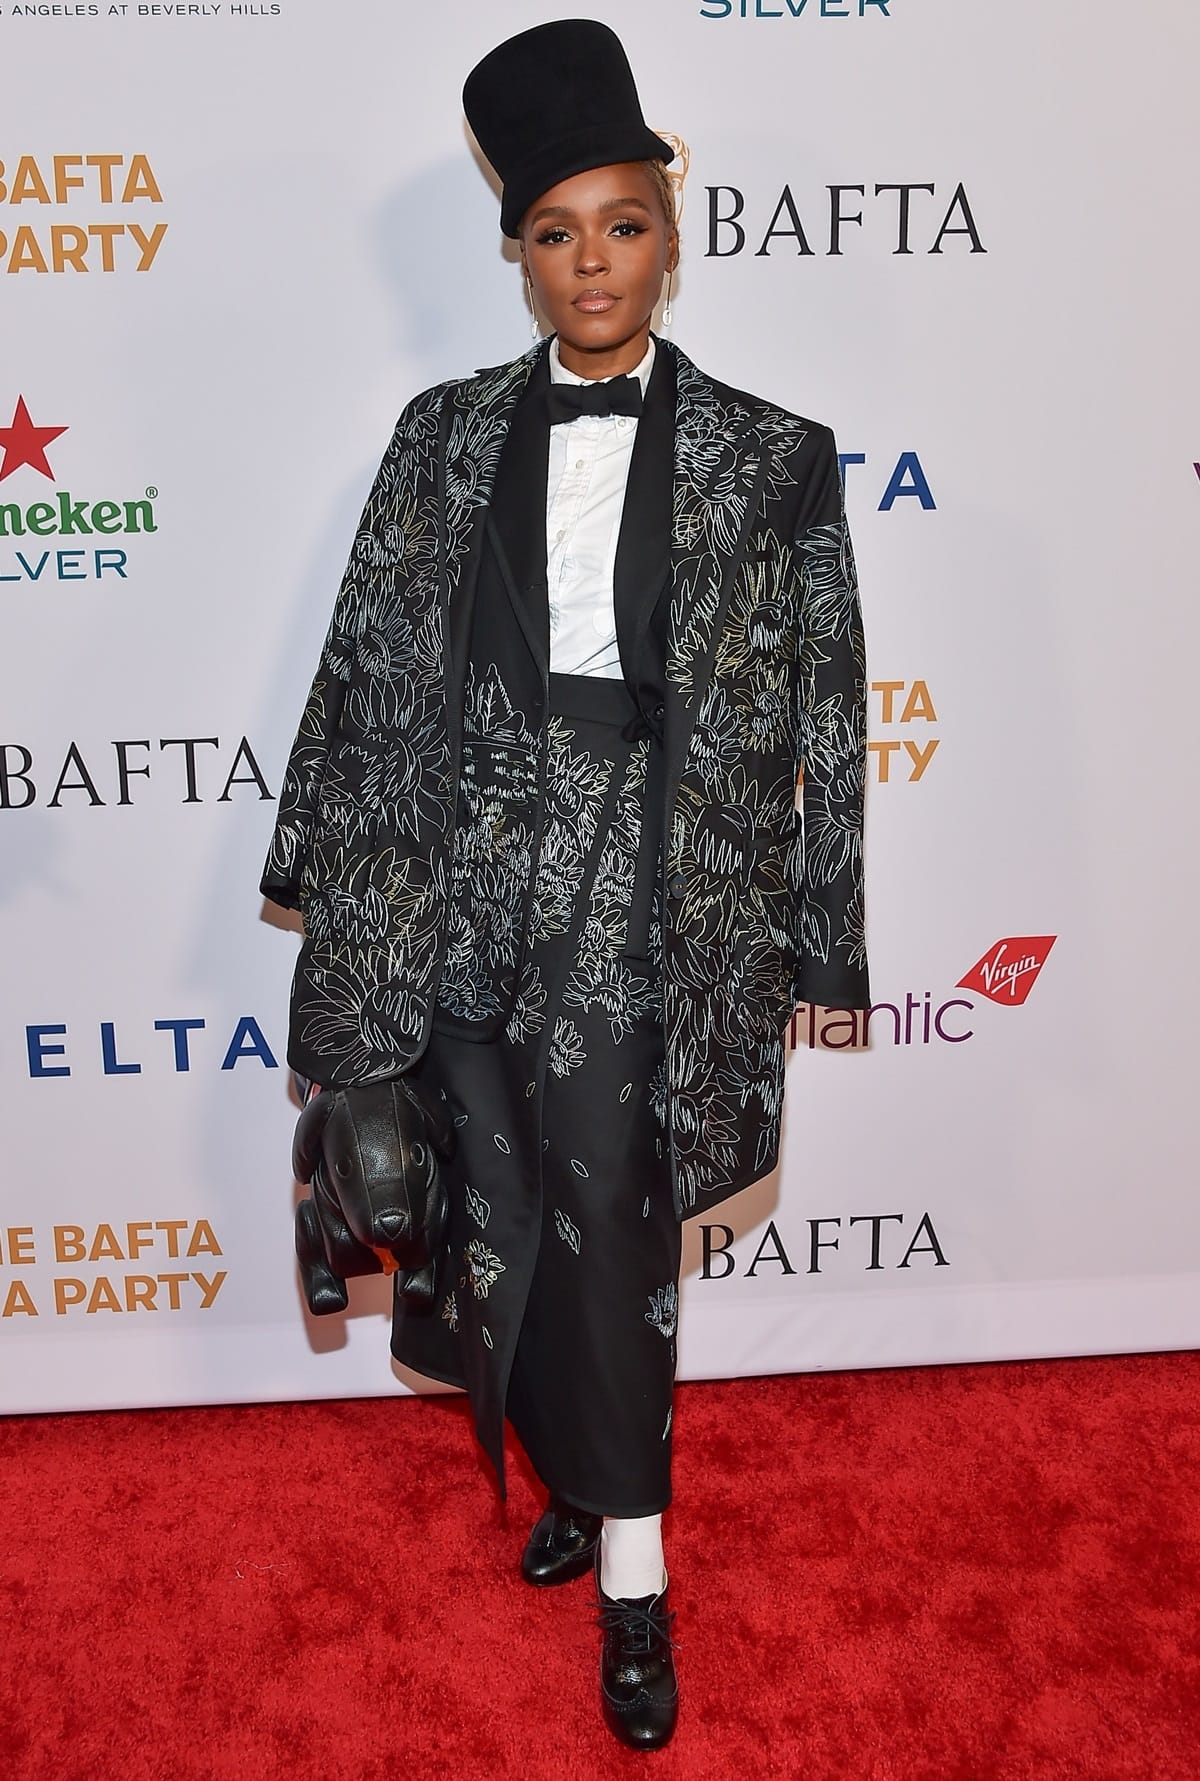 Janelle Monáe attended the BAFTA Tea Party in a complete Thom Browne ensemble featuring an embroidered skirt suit